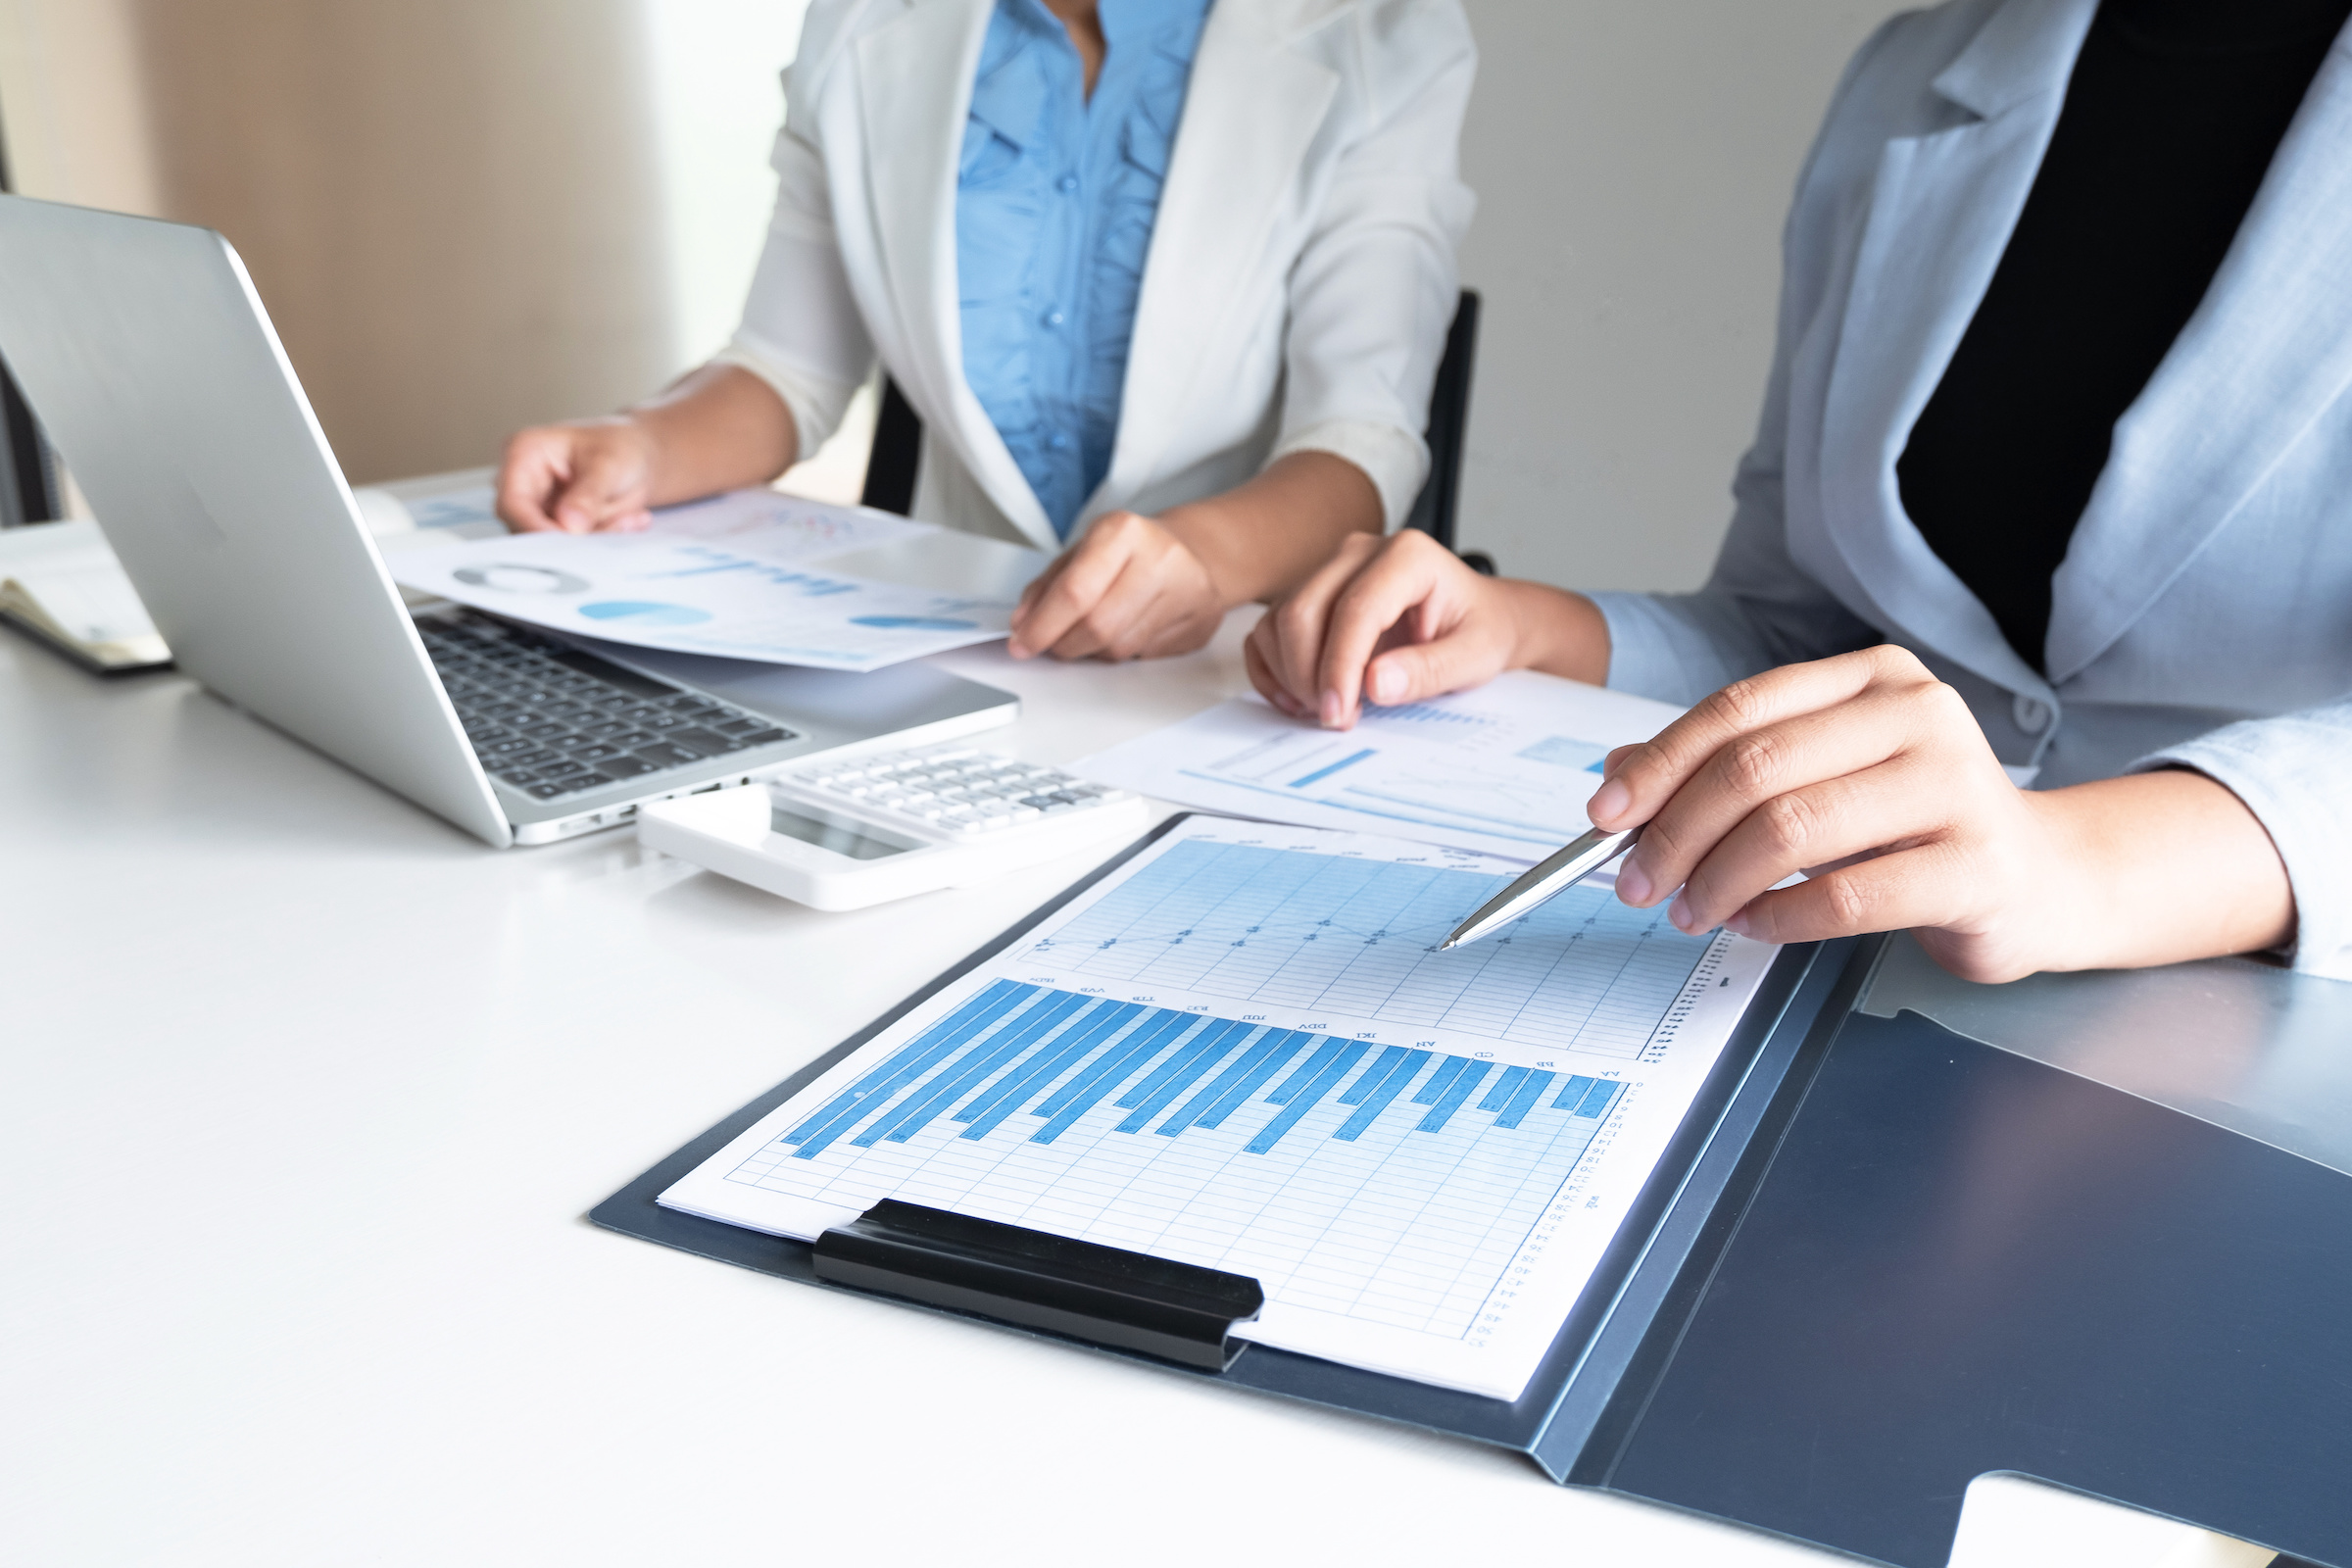 Two People Reviewing Financial Documents on a Table Showing Charts and Graphs